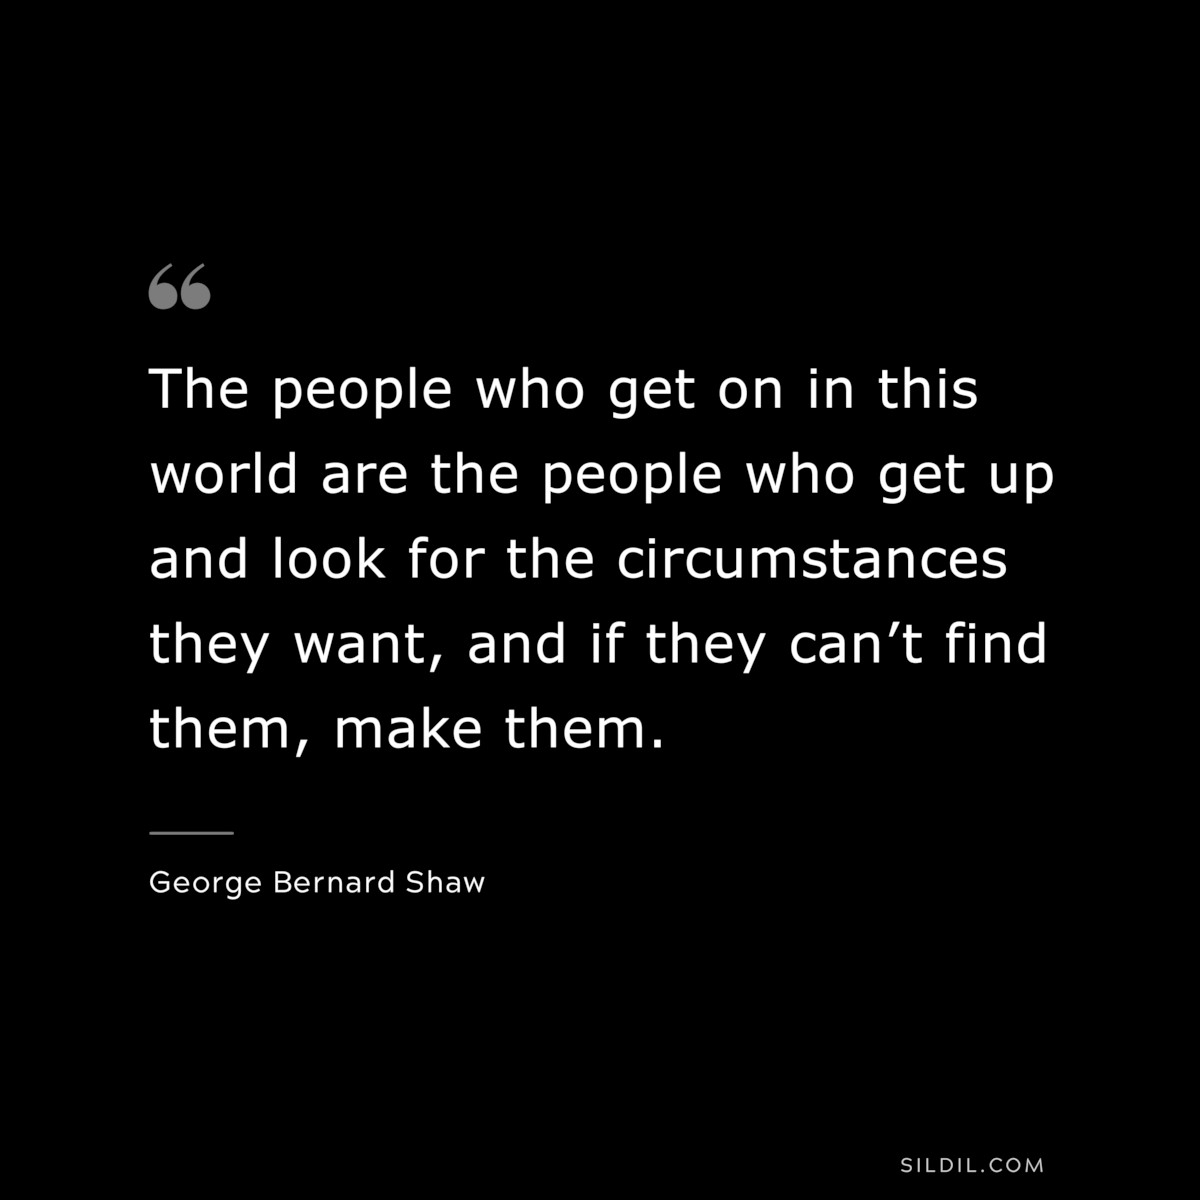 The people who get on in this world are the people who get up and look for the circumstances they want, and if they can’t find them, make them. ― George Bernard Shaw